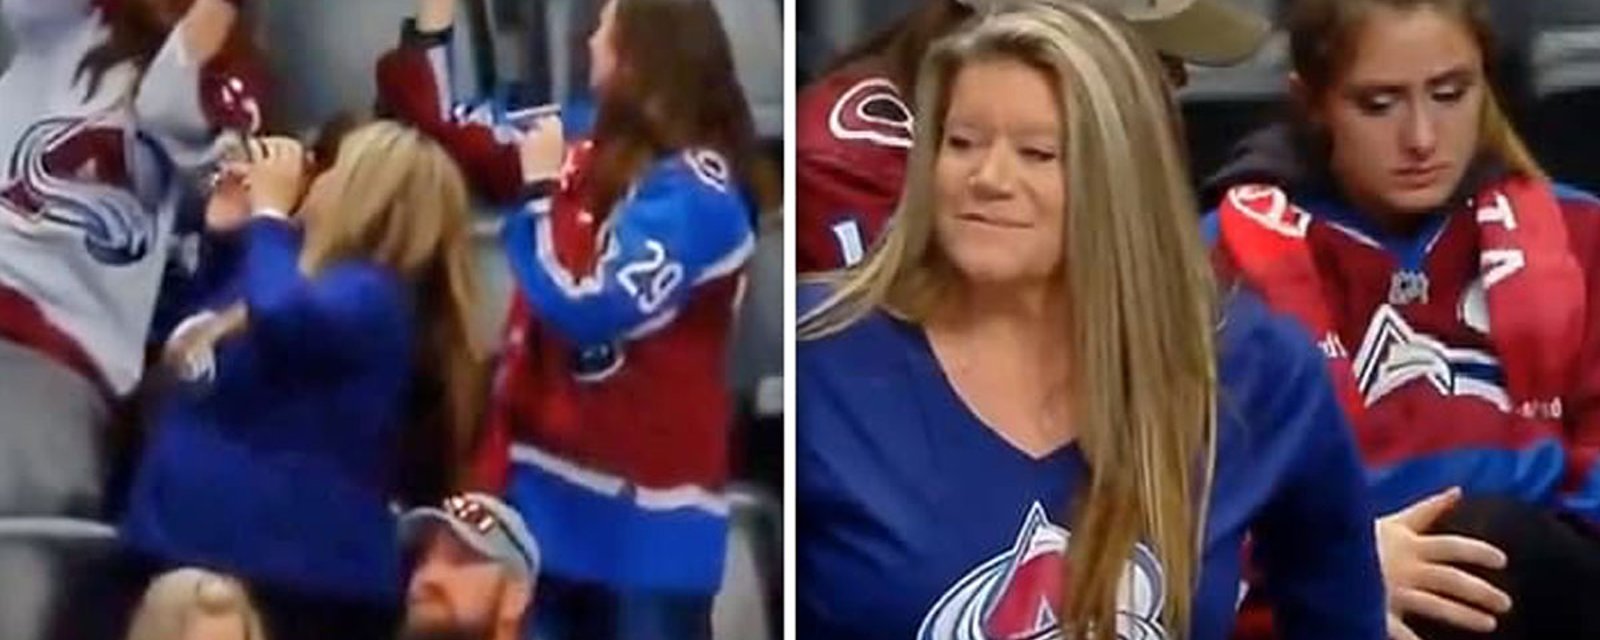 Avalanche fan is the worst boyfriend after hitting his girlfriend in puck-catching incident